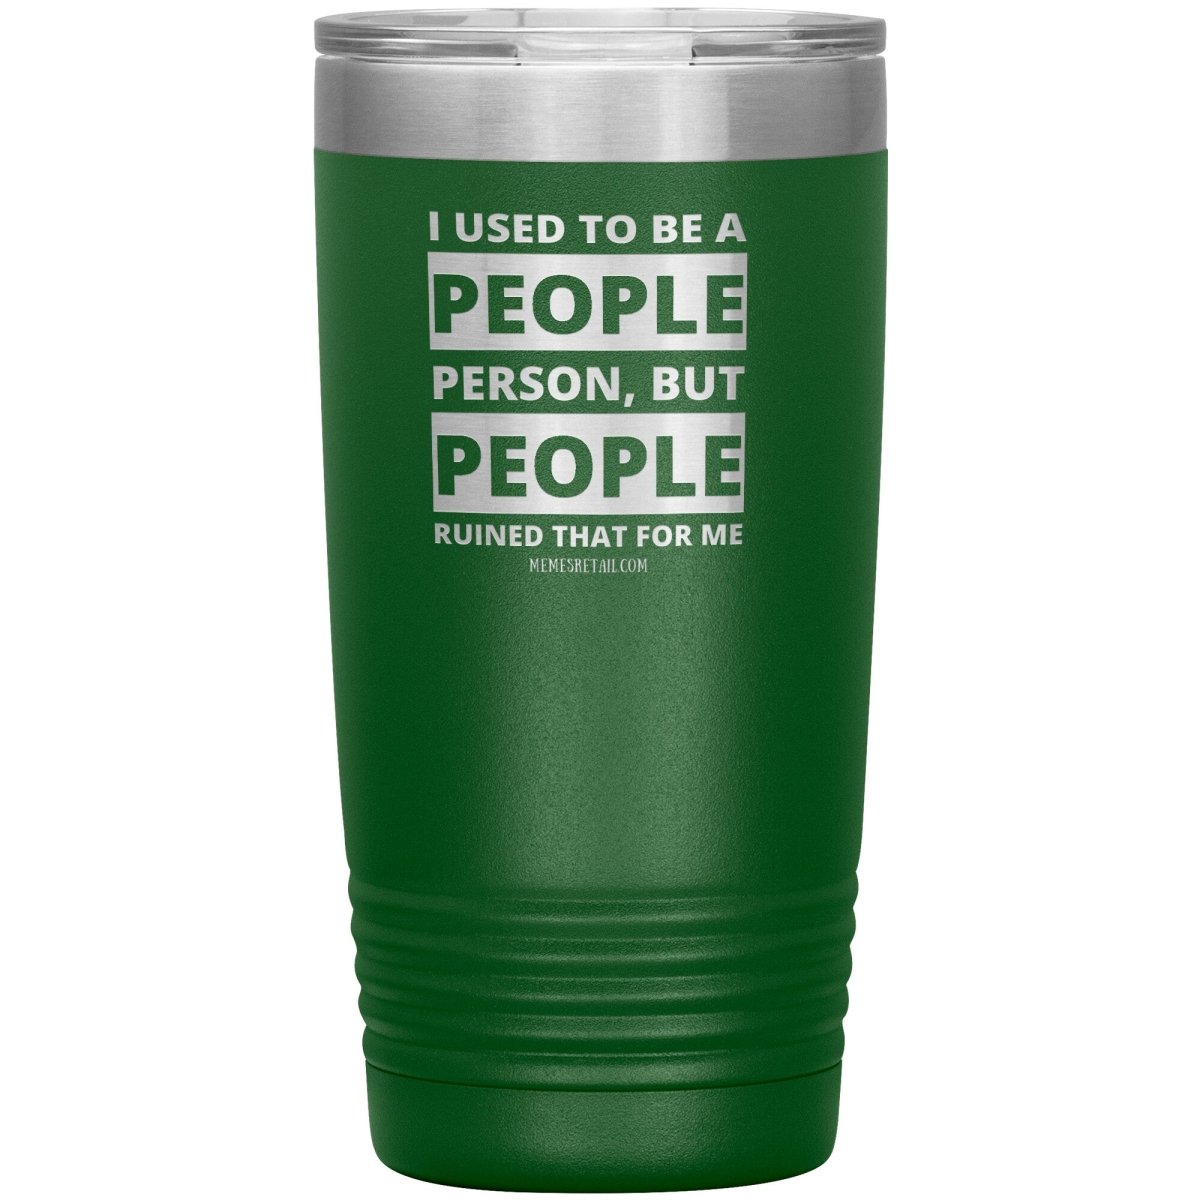 I Used To Be A People Person, But People Ruined That For Me Tumblers, 20oz Insulated Tumbler / Green - MemesRetail.com